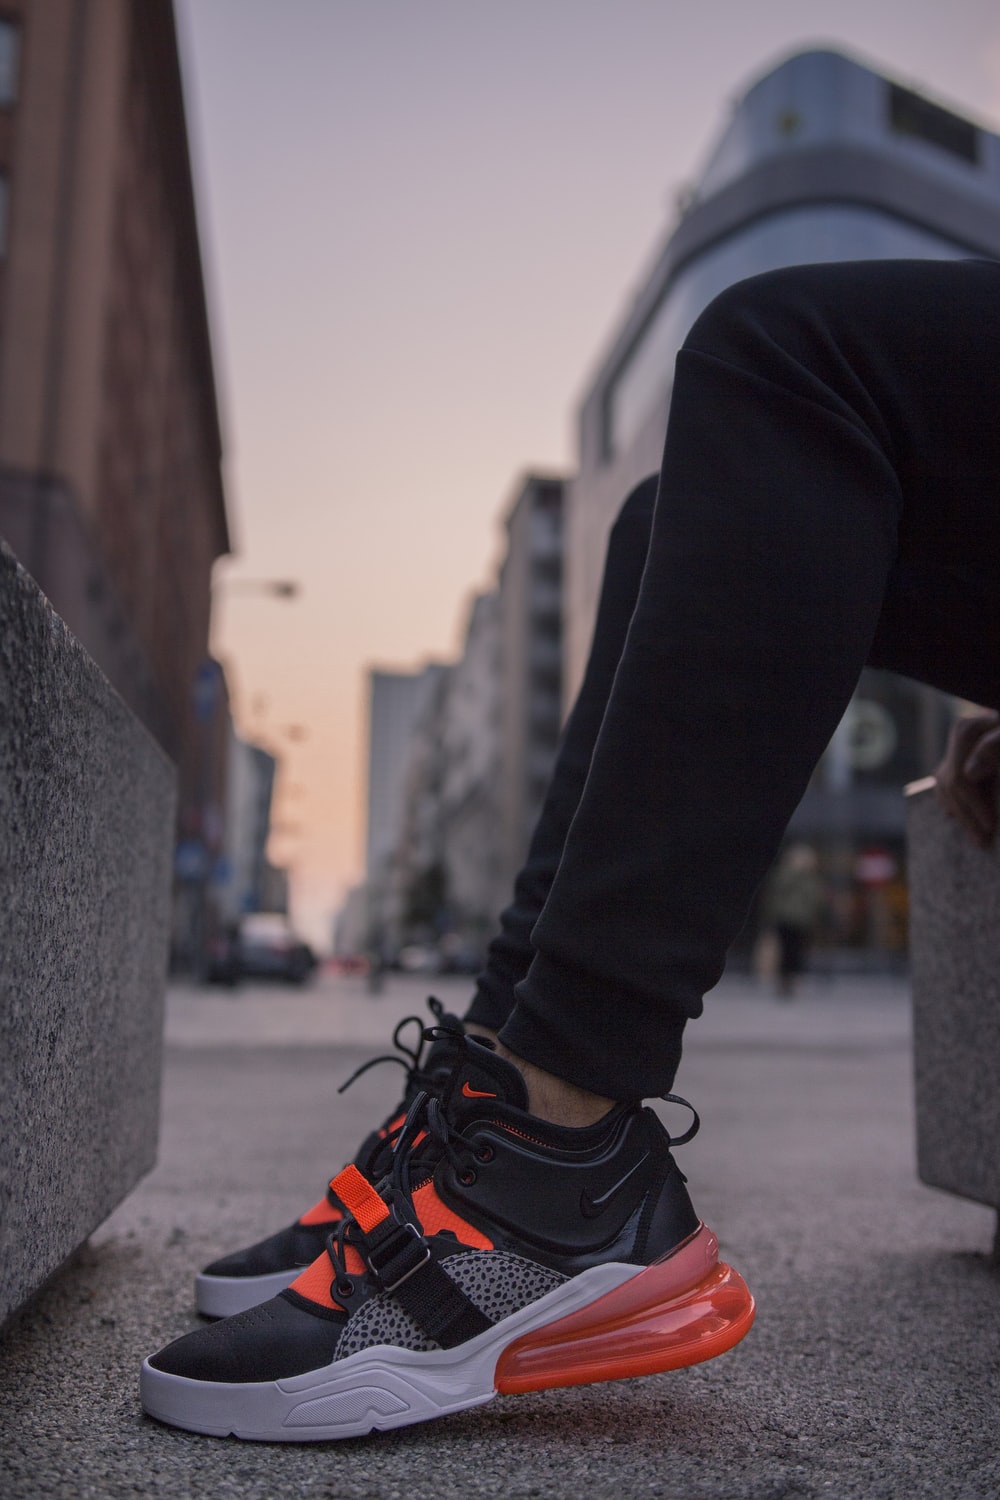 Person Wearing Black And Gray Nike Air Max 270 Shoes Photo